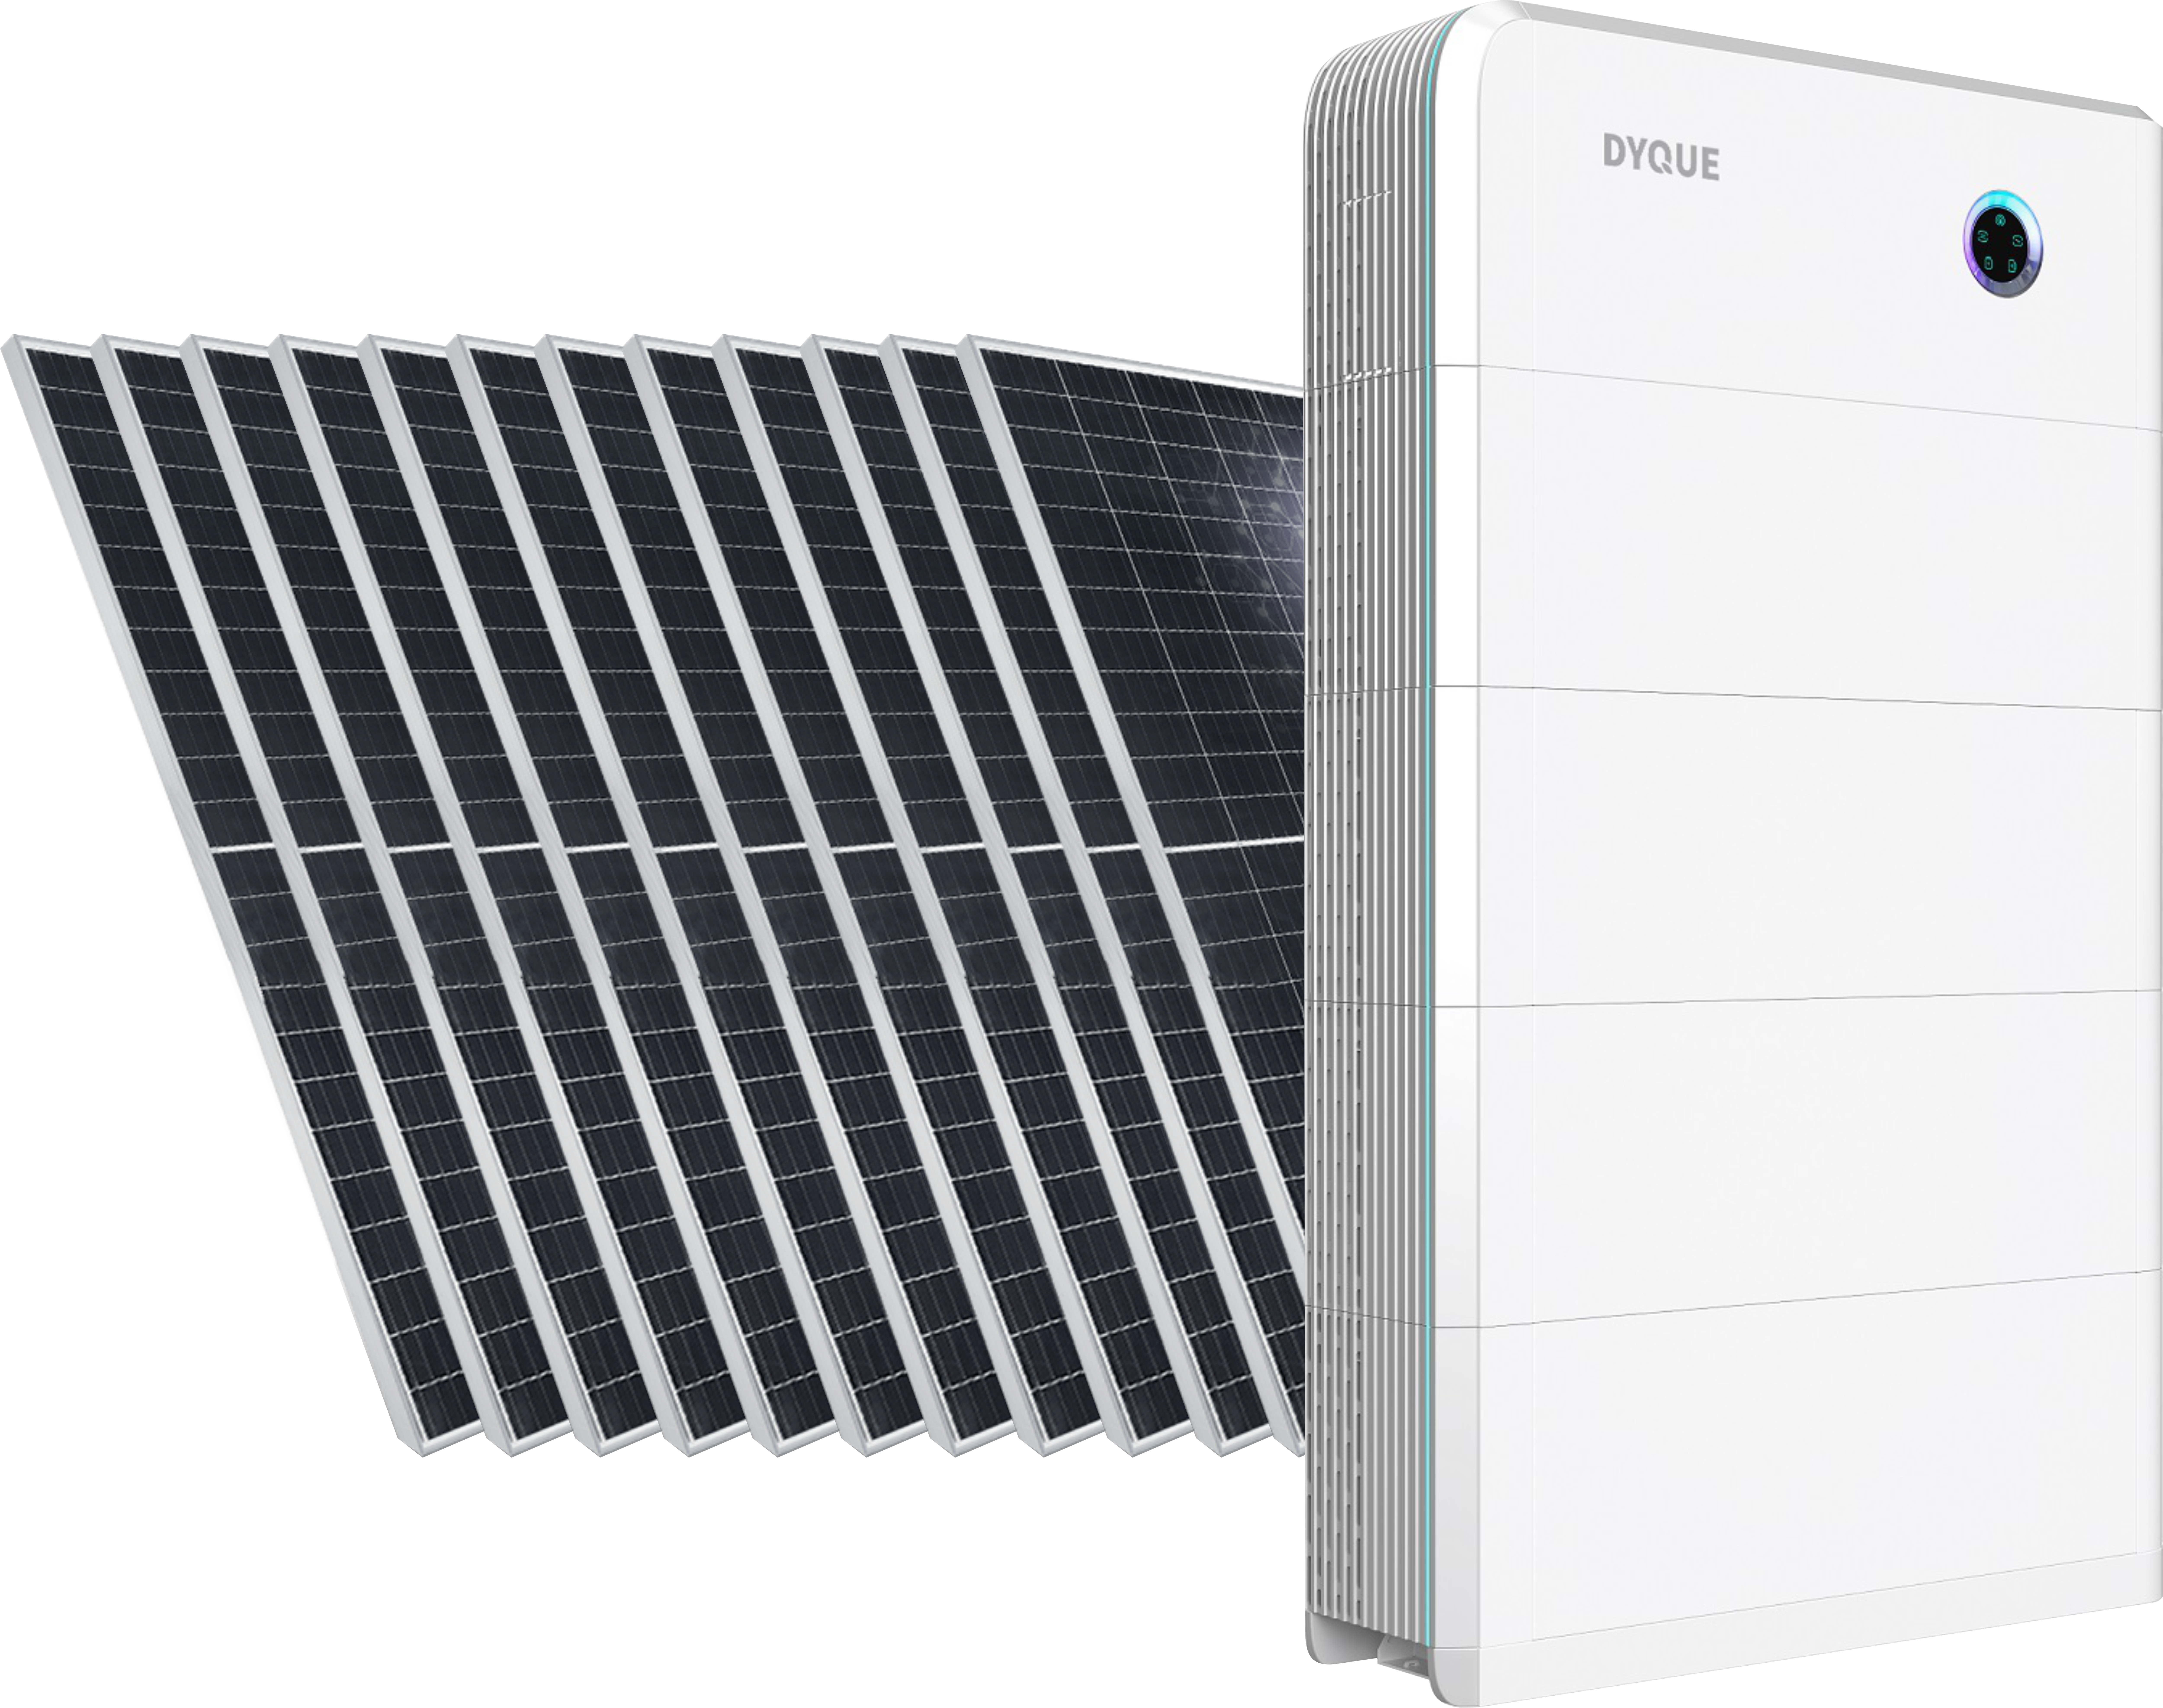 Dyque Premium Power Wall Bundle (D510):  15kVA + 32kWh Lithium + 23,000W